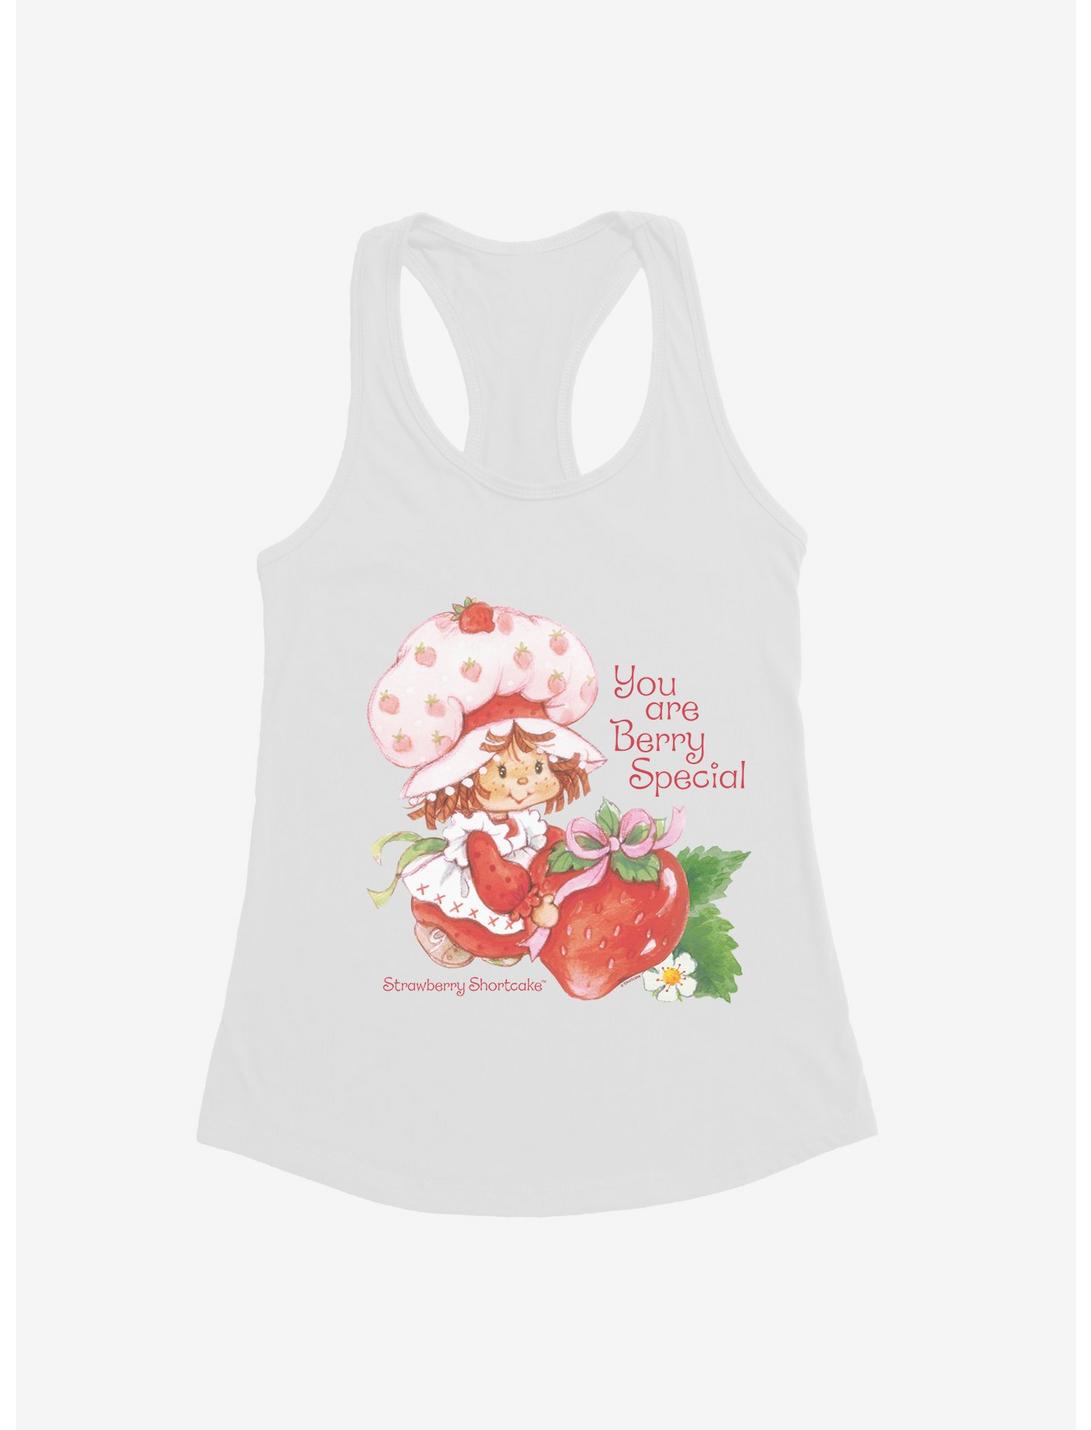 Strawberry Shortcake You Are Berry Special Girls Tank, WHITE, hi-res